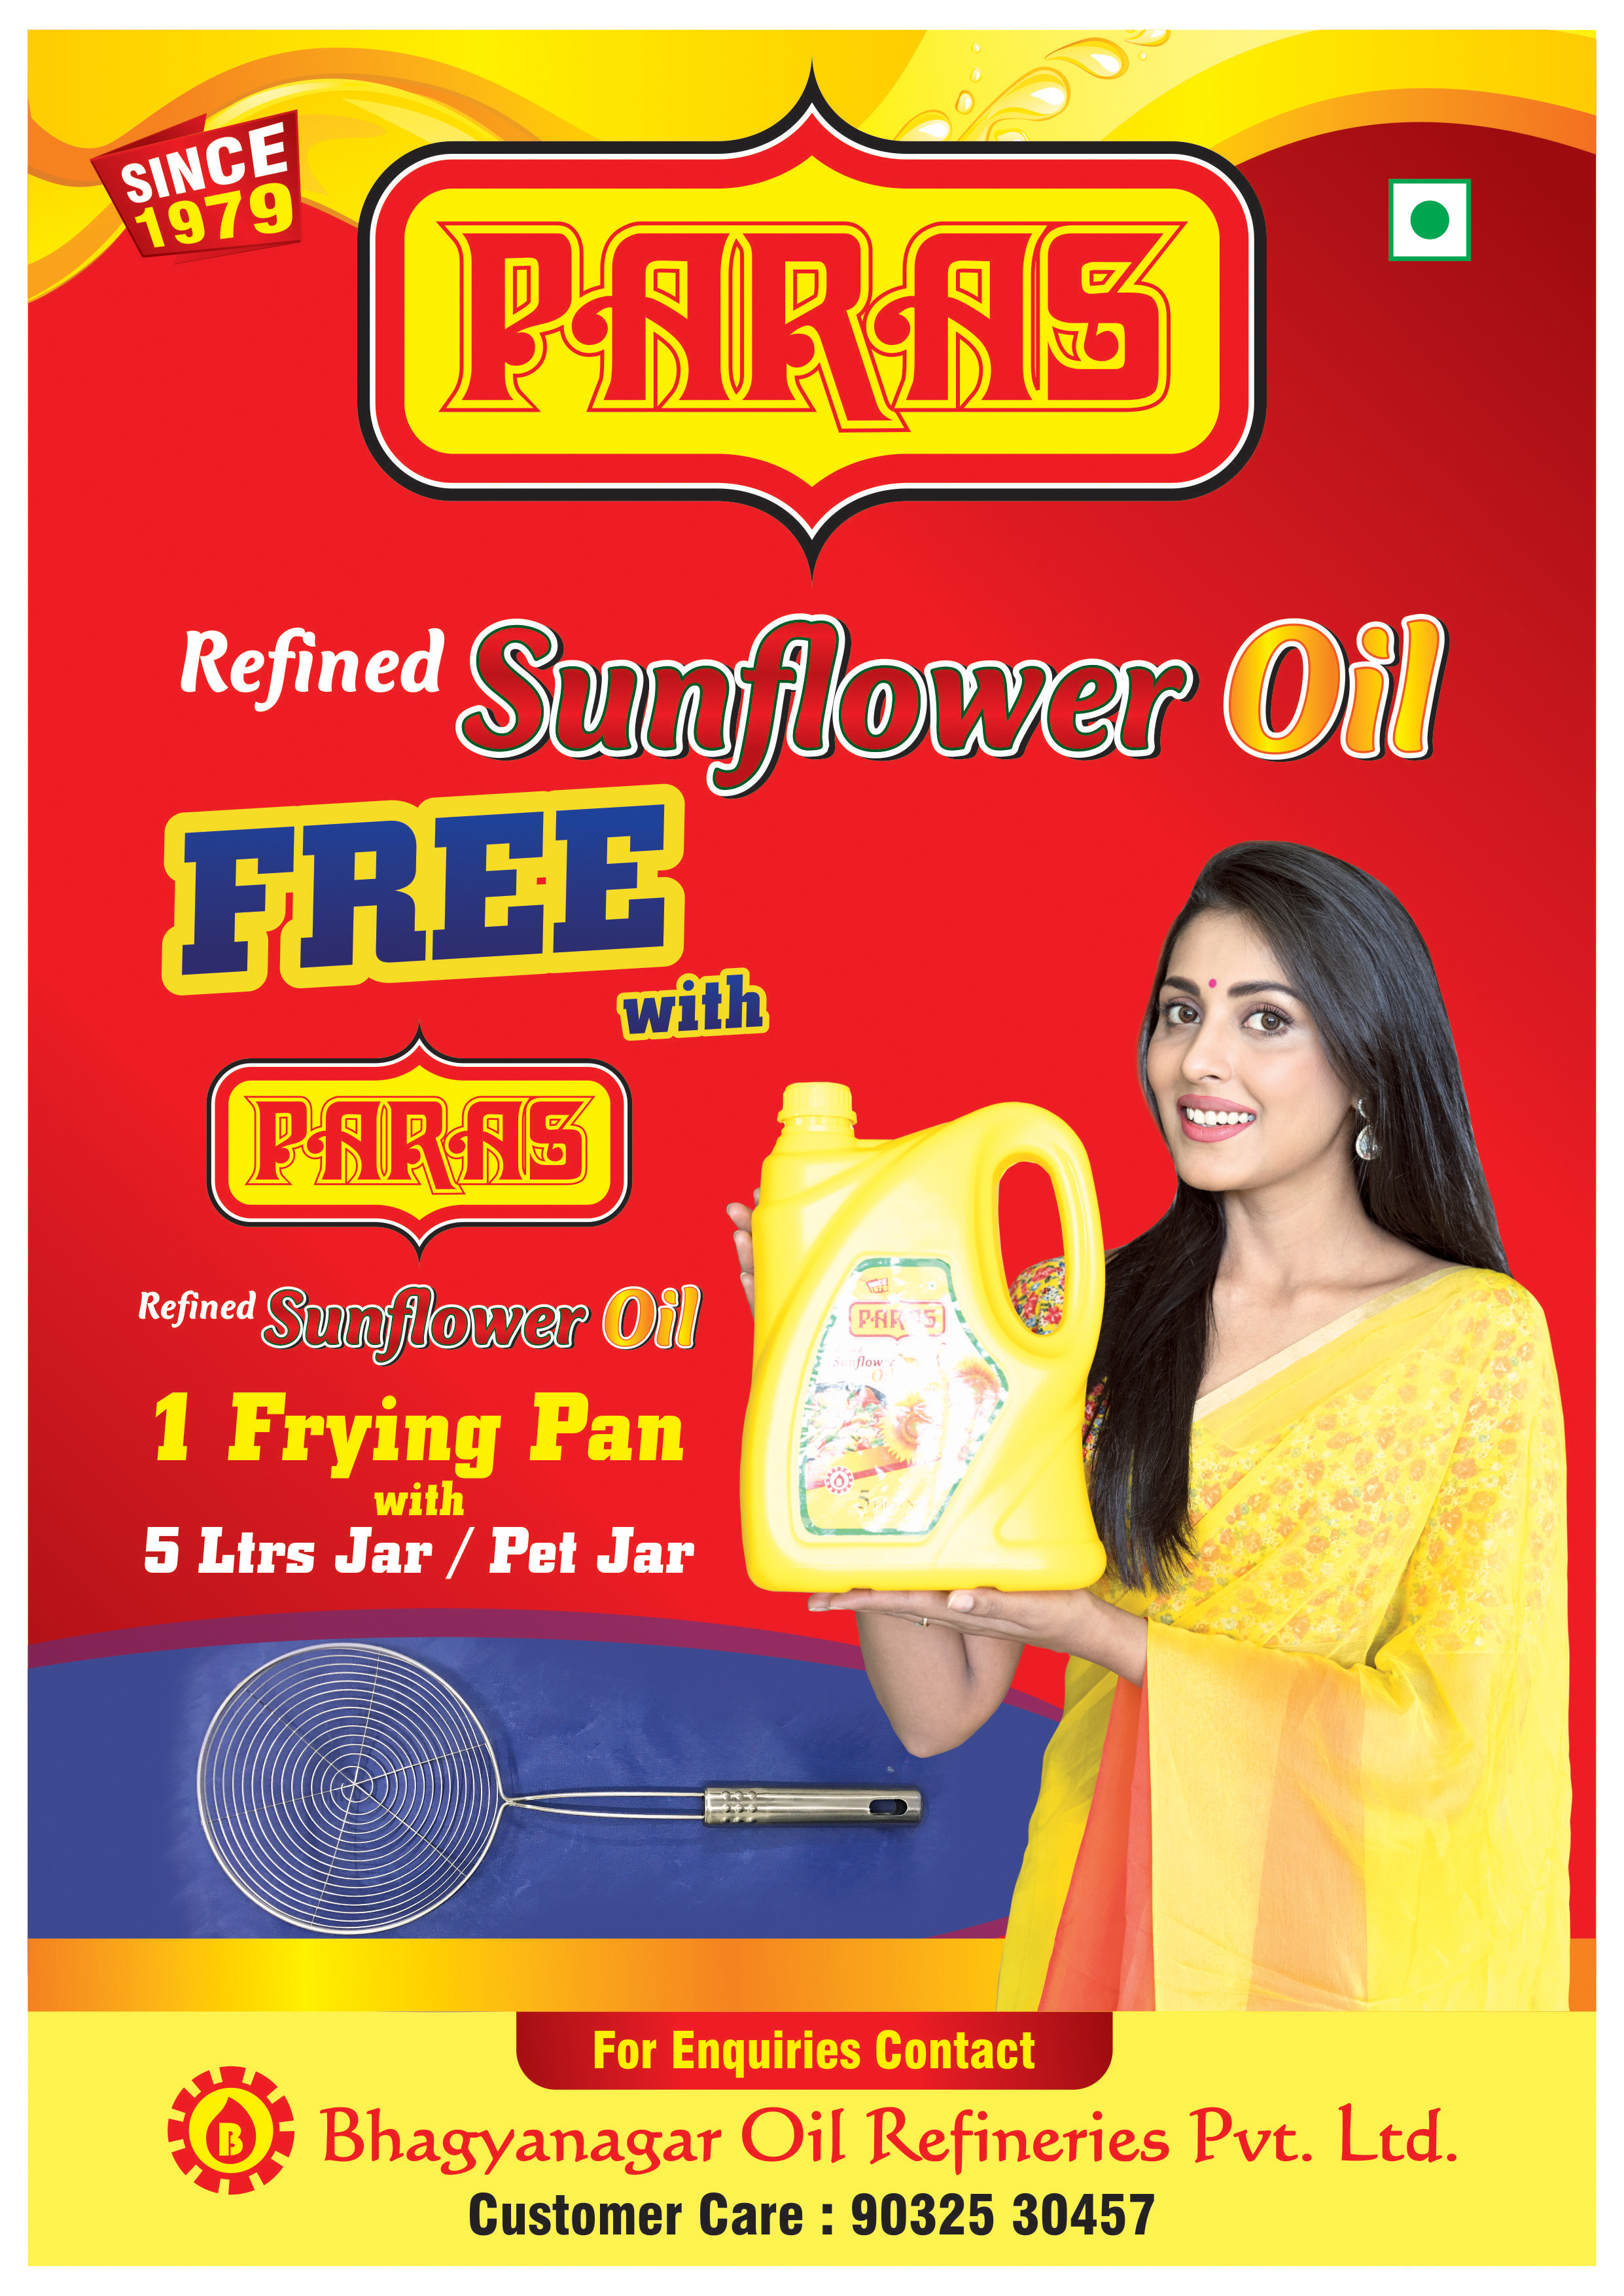 paras-refined-sunflower-oil-free-frying-pan-with-5-litres-ad-hindi-milap-hyderabad-08-09-2017